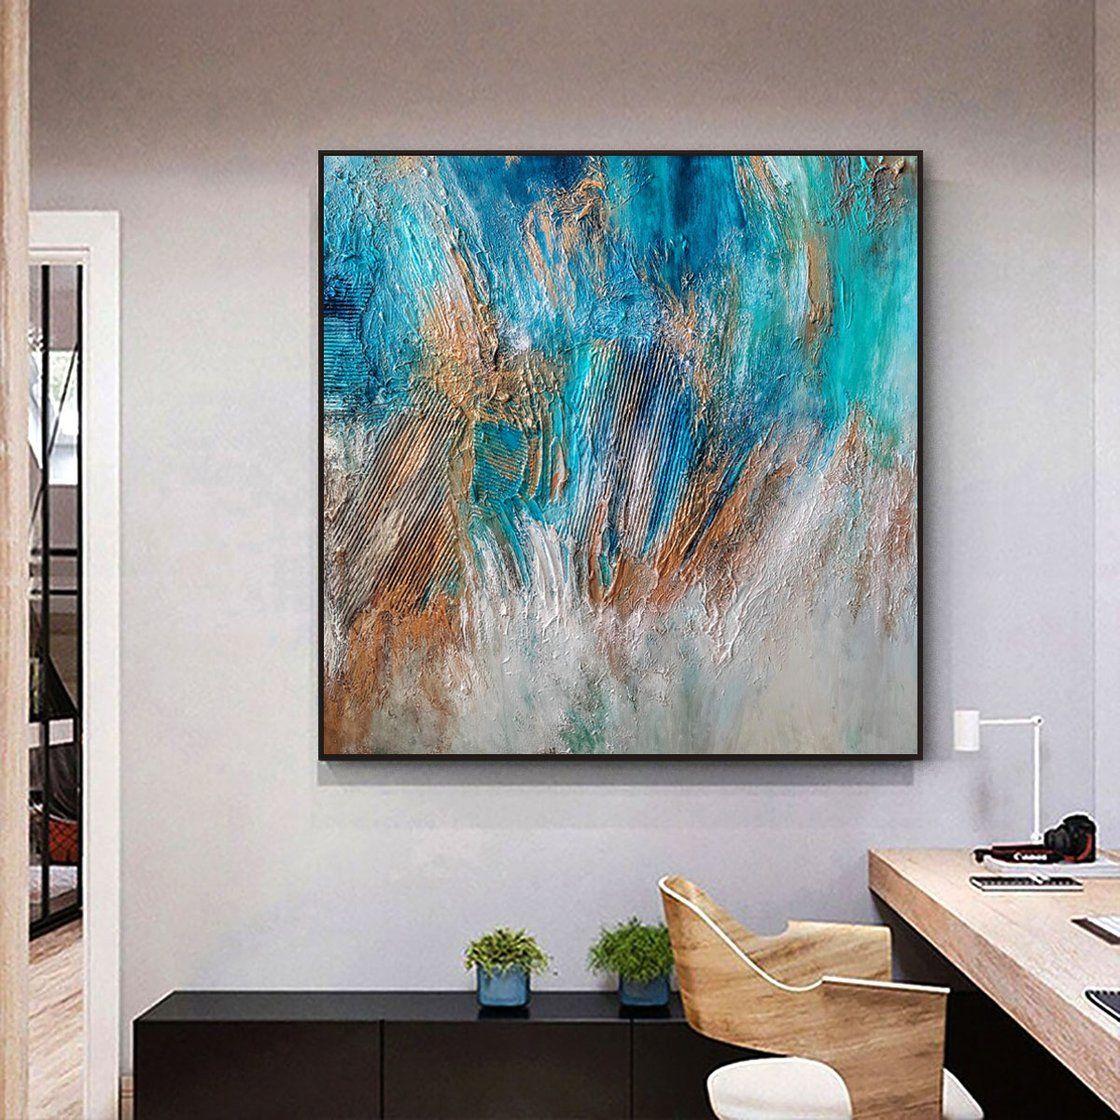 Shades of blue, Mixed Media on Canvas - Abstract Mixed Media Art by Alexandra Petropoulou